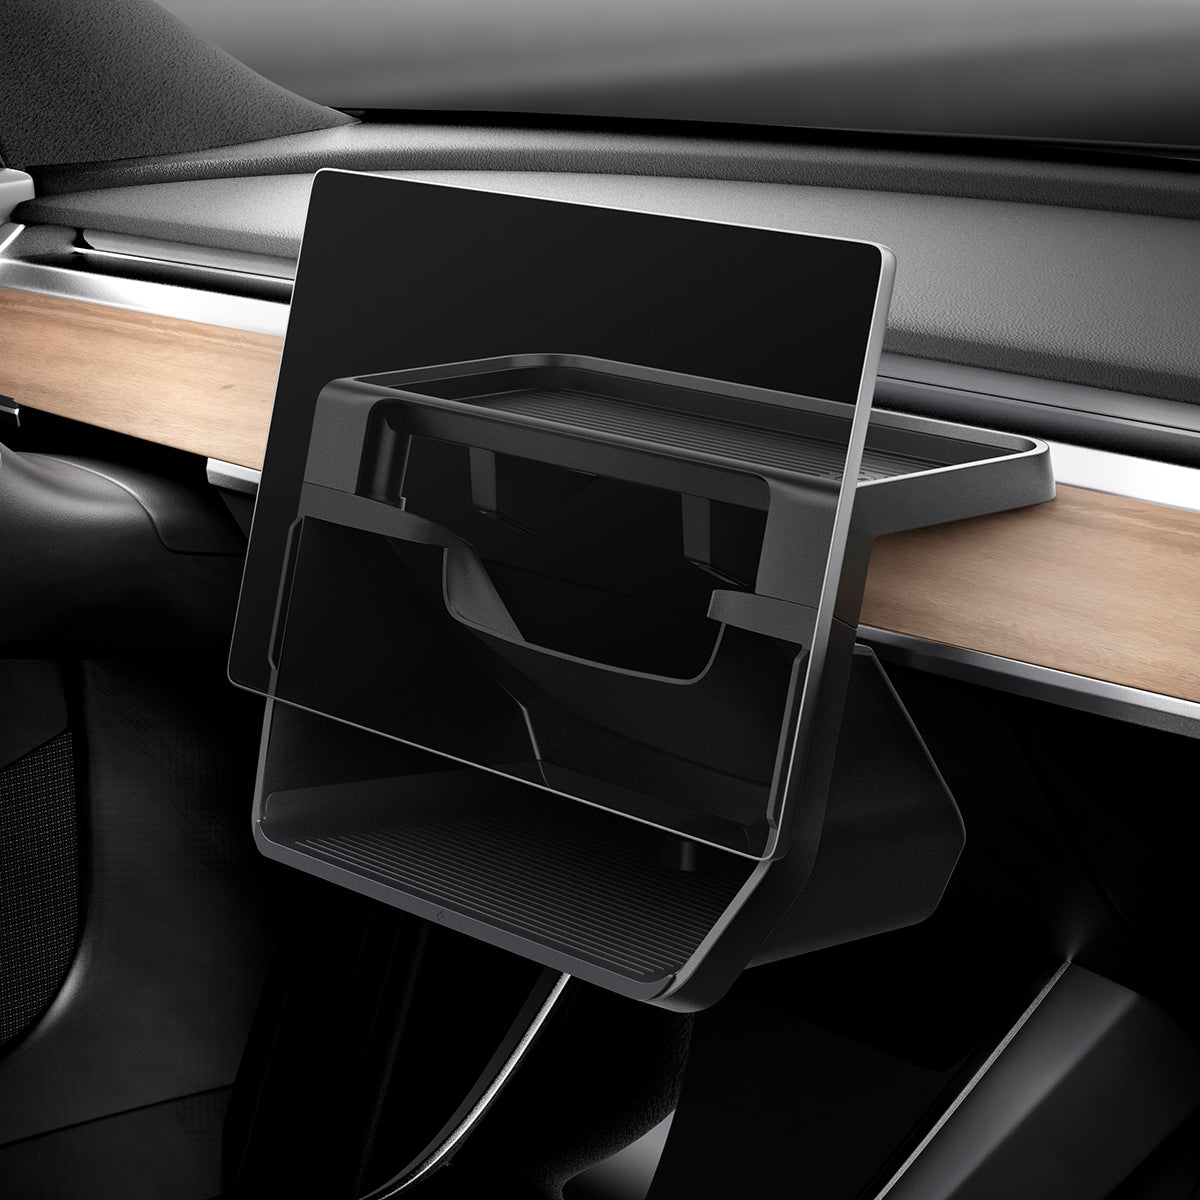 ACP07280 - Tesla Model Y & 3 Under Screen Organizer TO227 in Black showing the front and partial inner parts of the organizer with a device attached